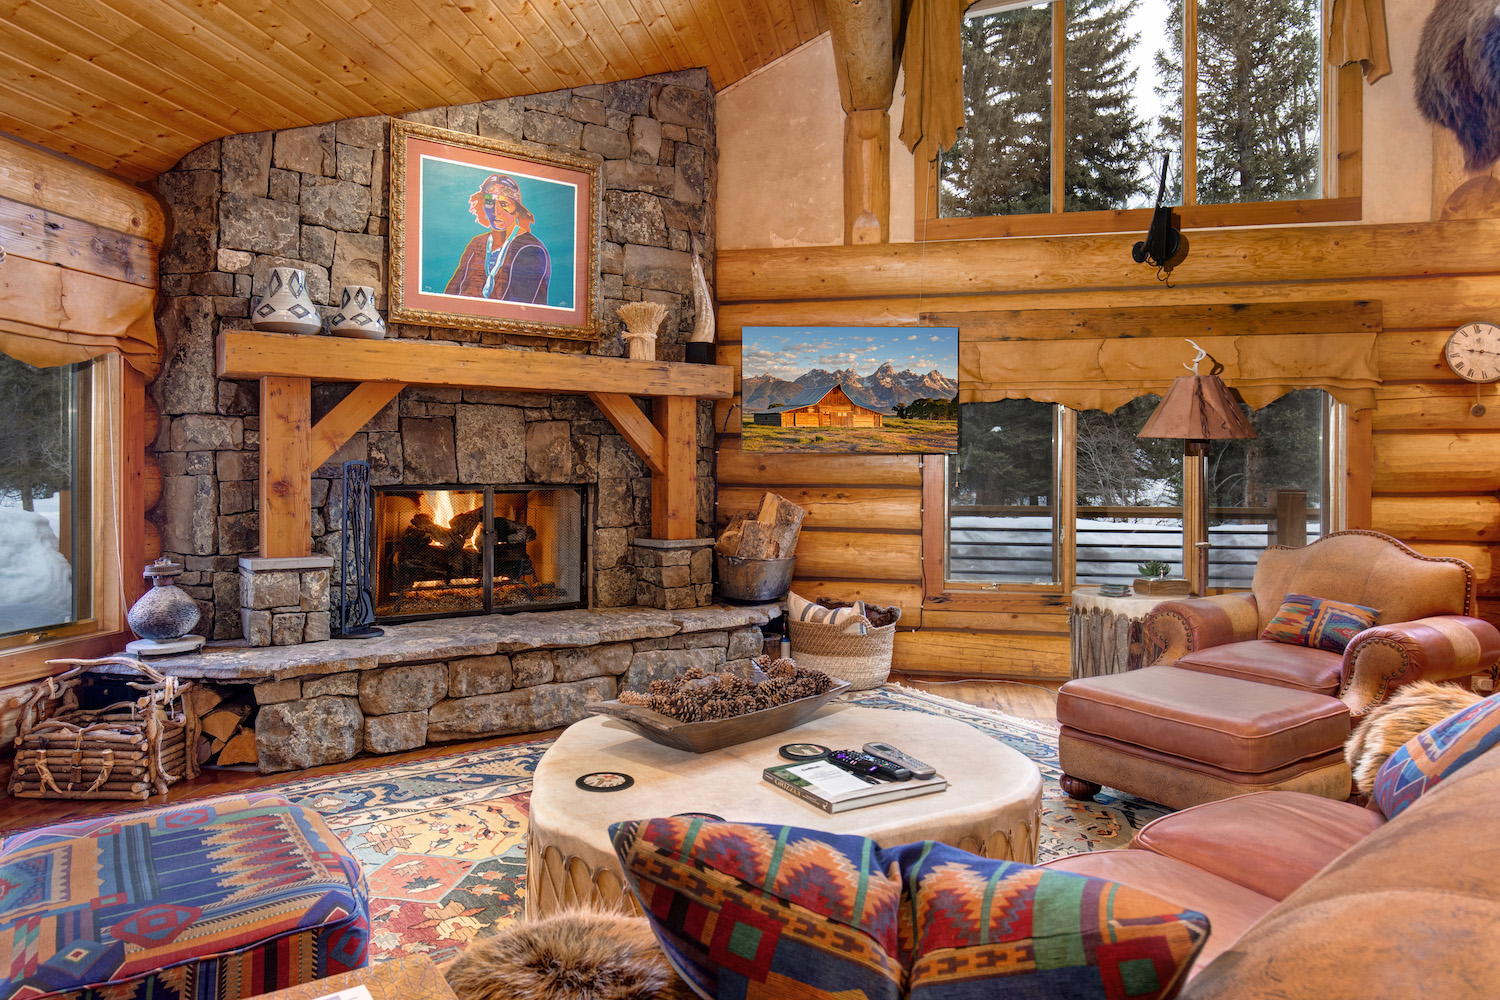 The inside of one of our luxury rentals in Jackson Hole, Wyoming